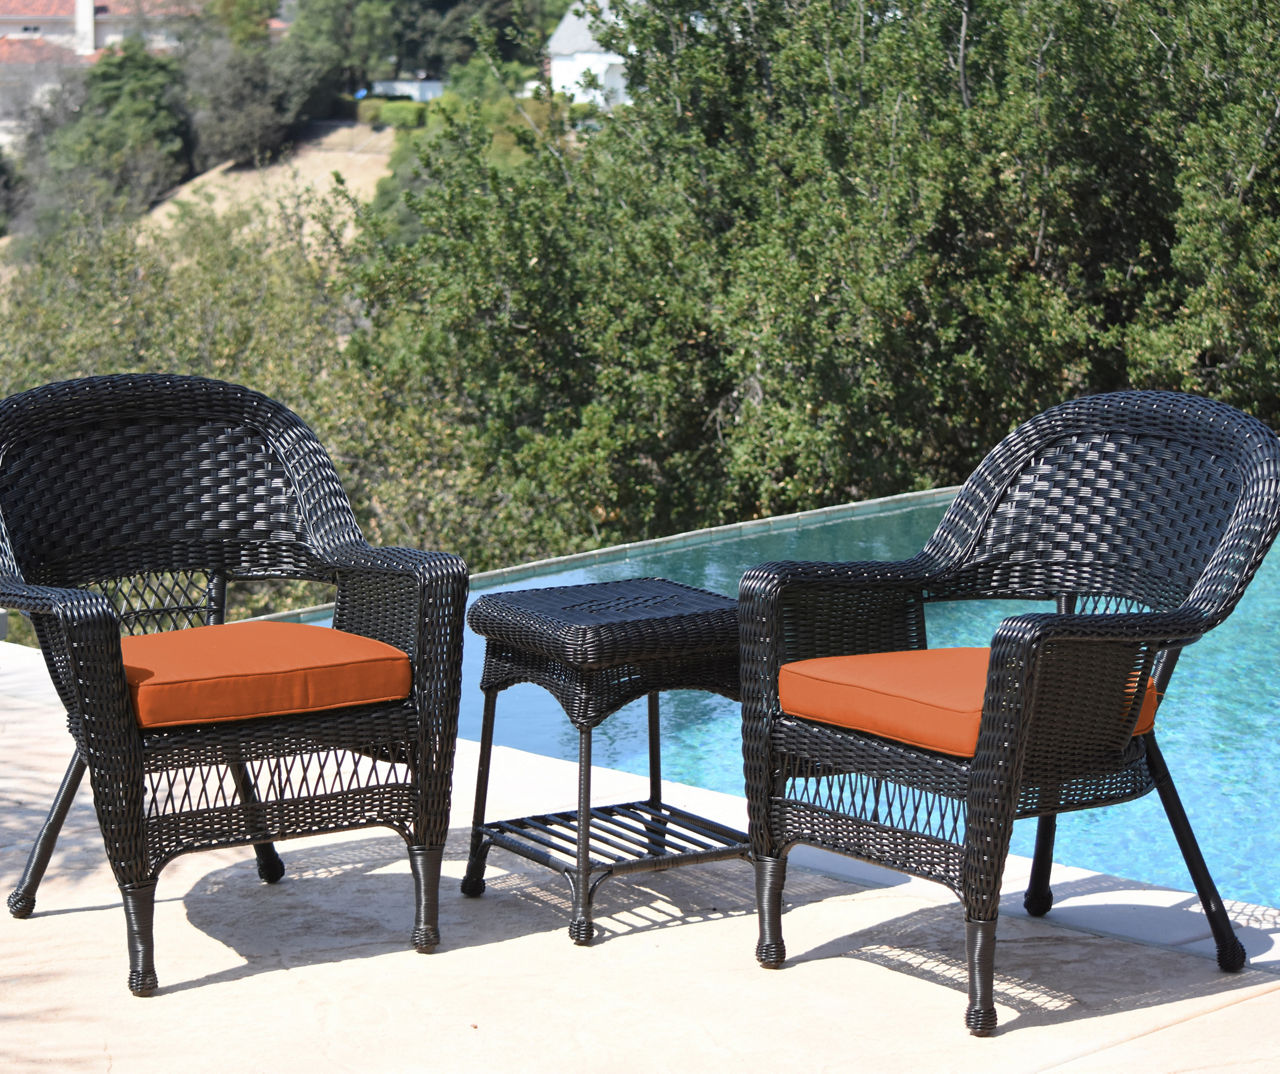 Black 3-Piece Patio All-Weather Wicker Chat Set with Orange Cushions